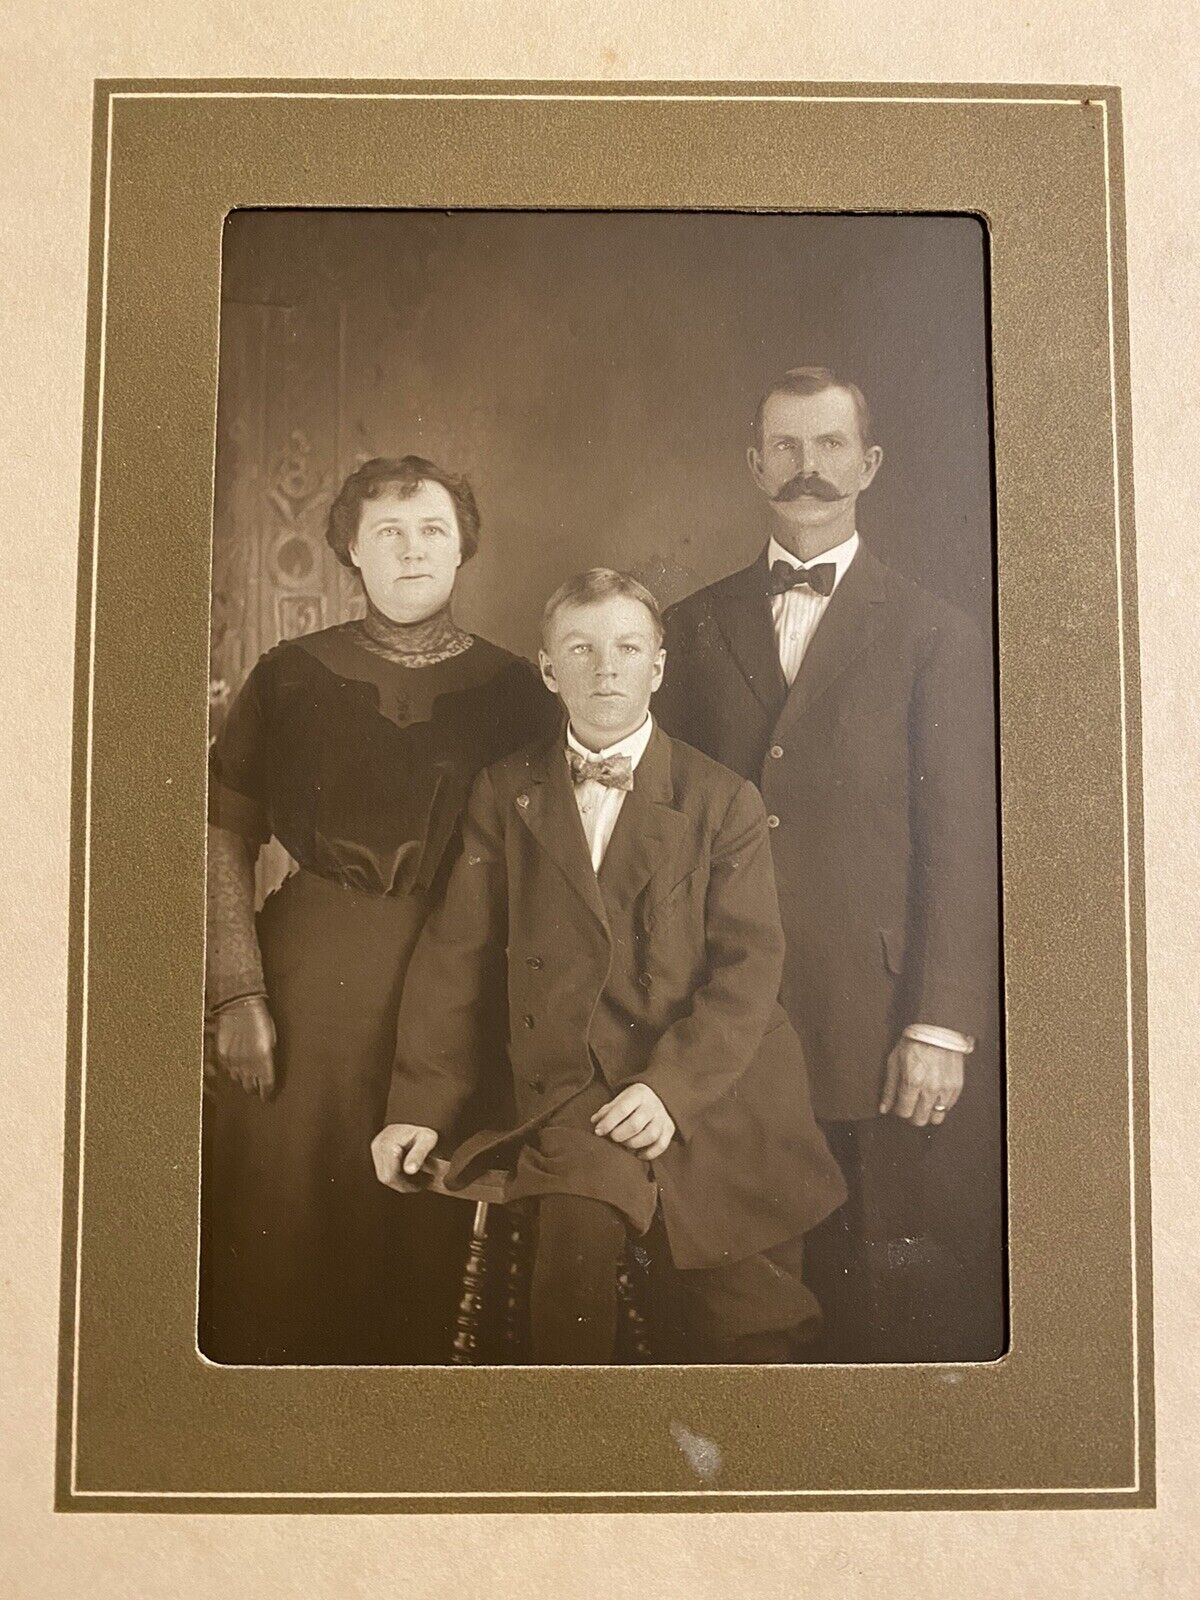 Framed Cabinet Card Sepiatone Family Of 3 Portrait Mother Father Son c1900s